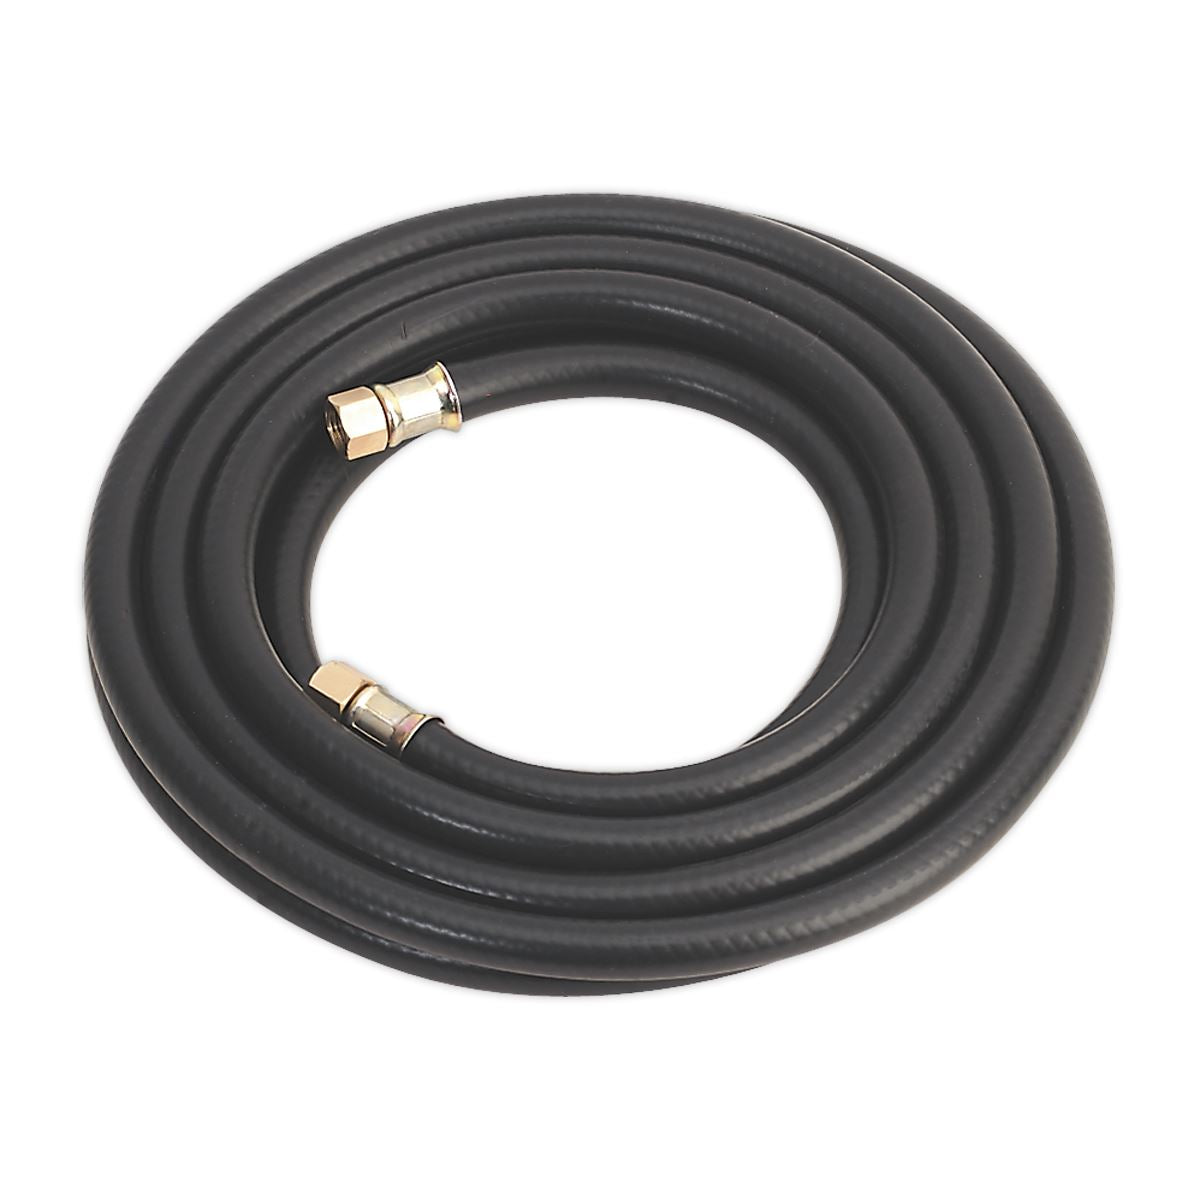 Sealey Air Hose 5m x Ø8mm with 1/4"BSP Unions Heavy-Duty